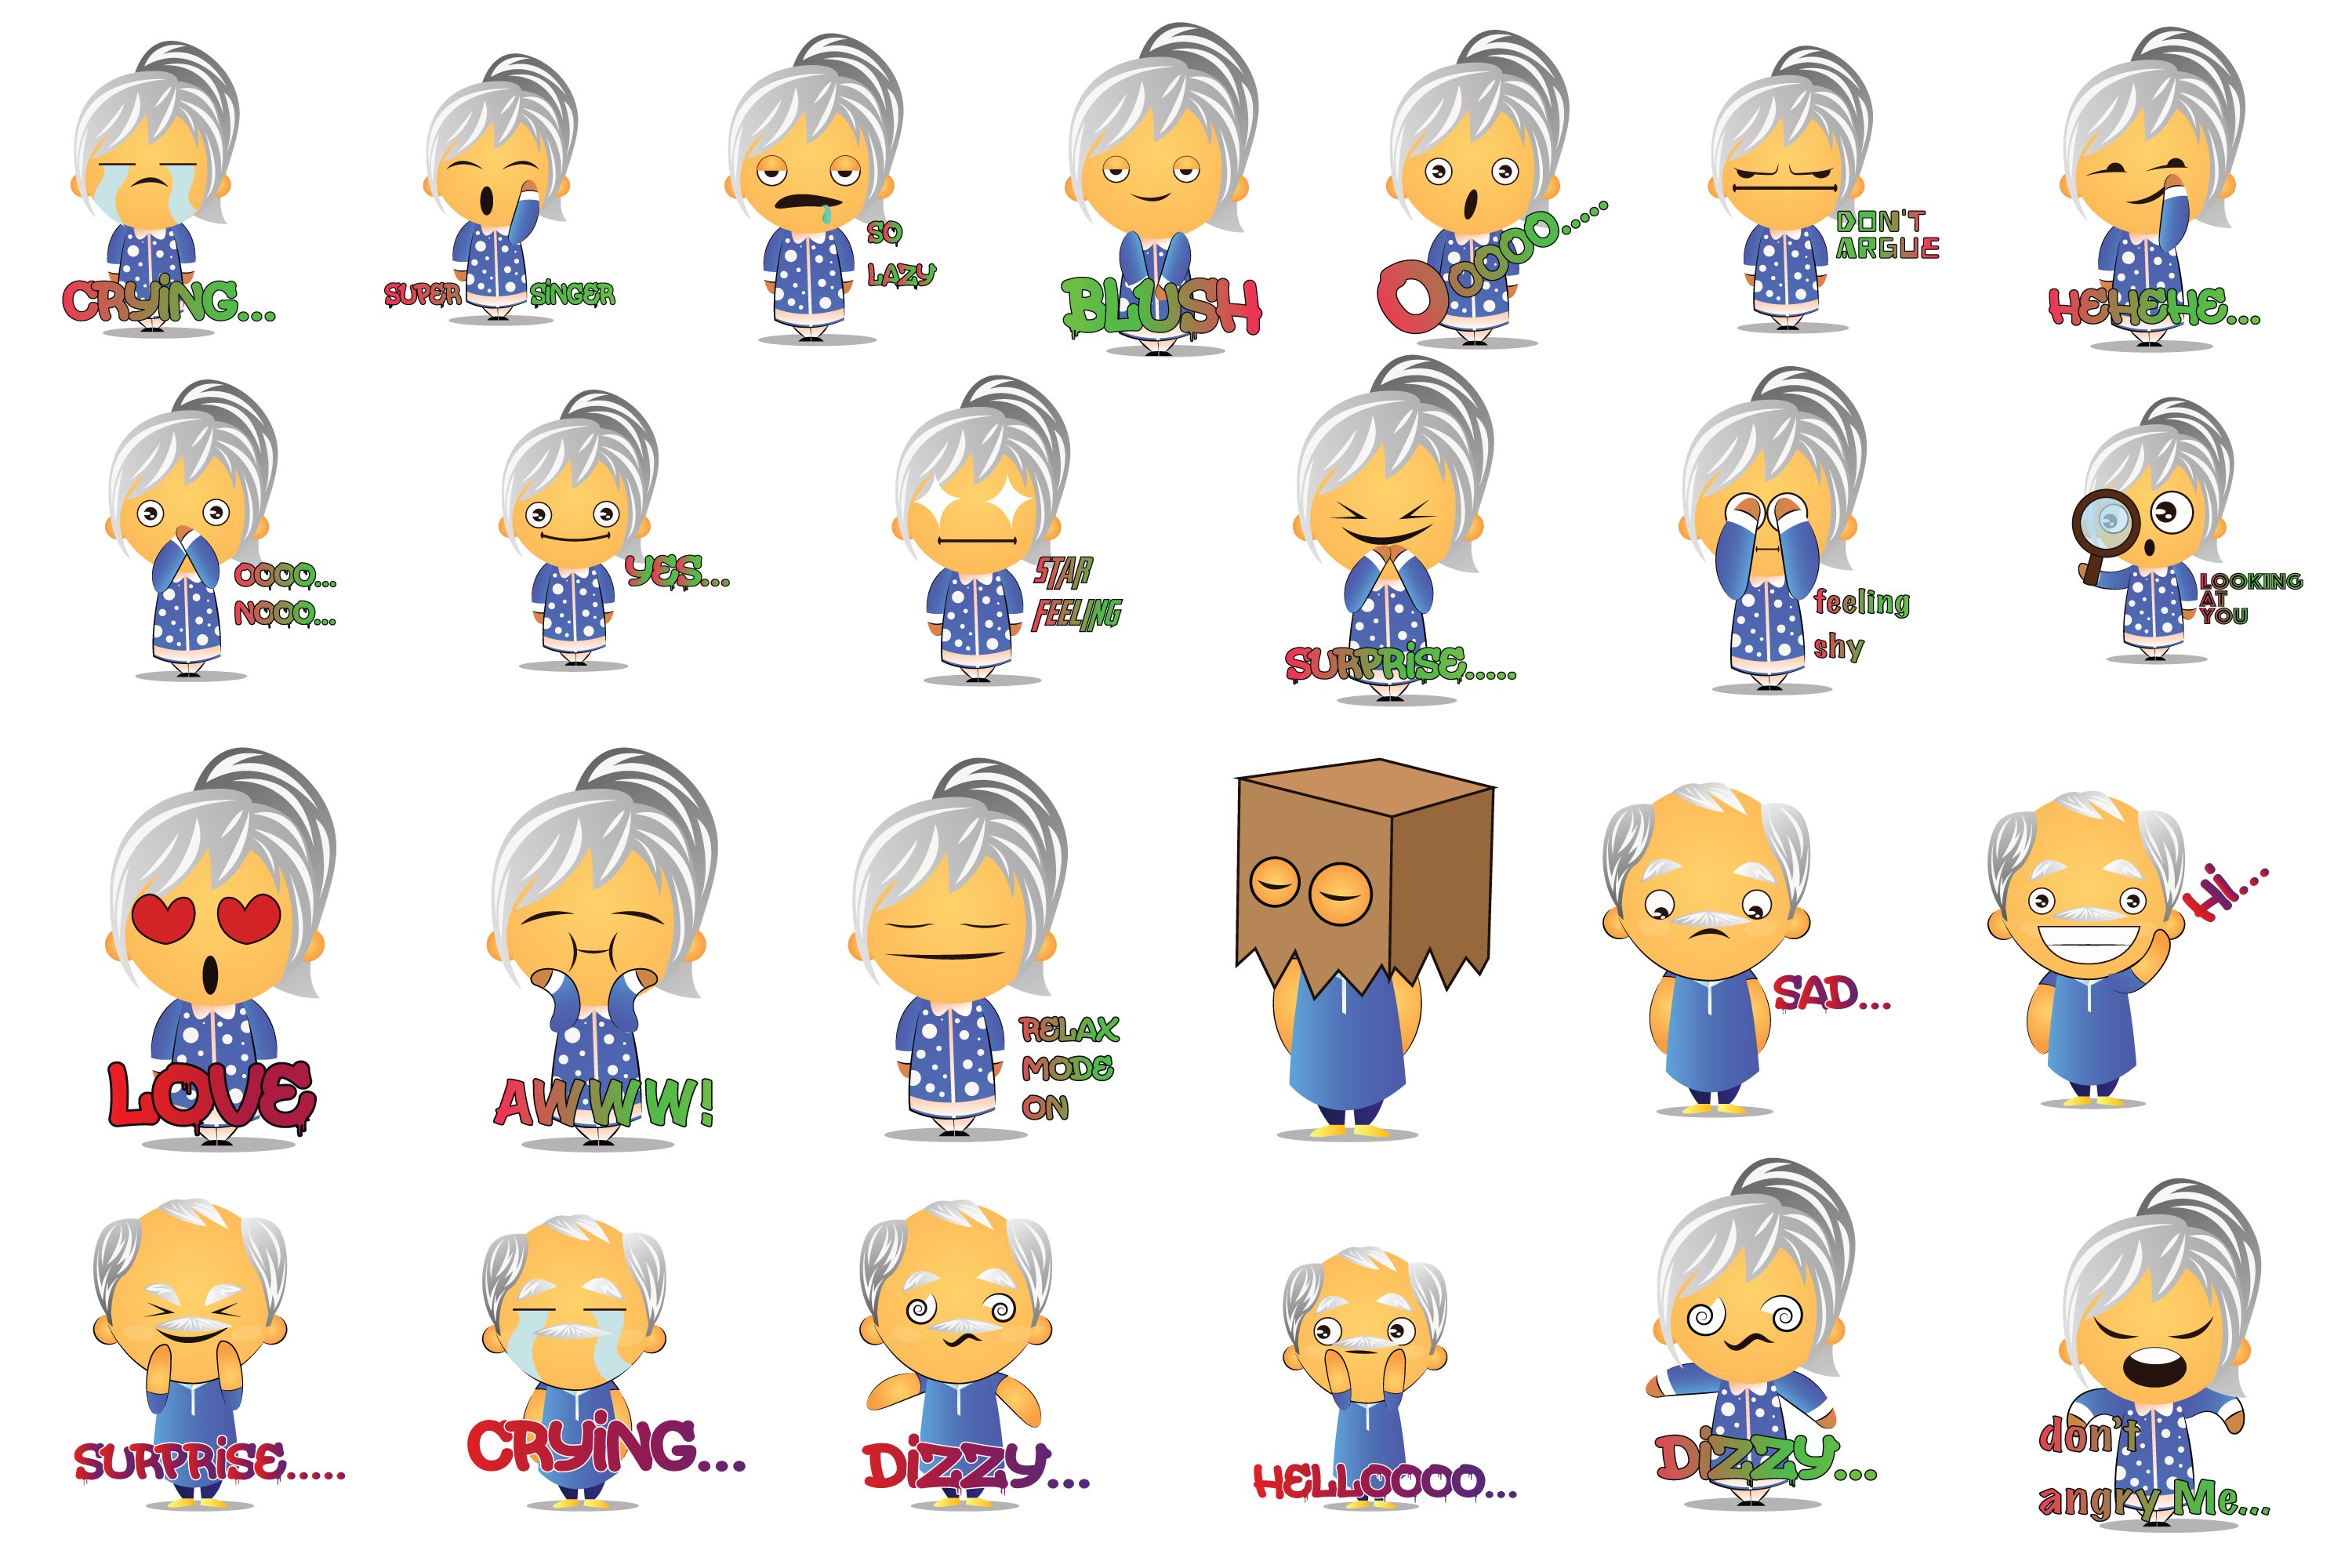 High quality emotions illustrations for your grandma.